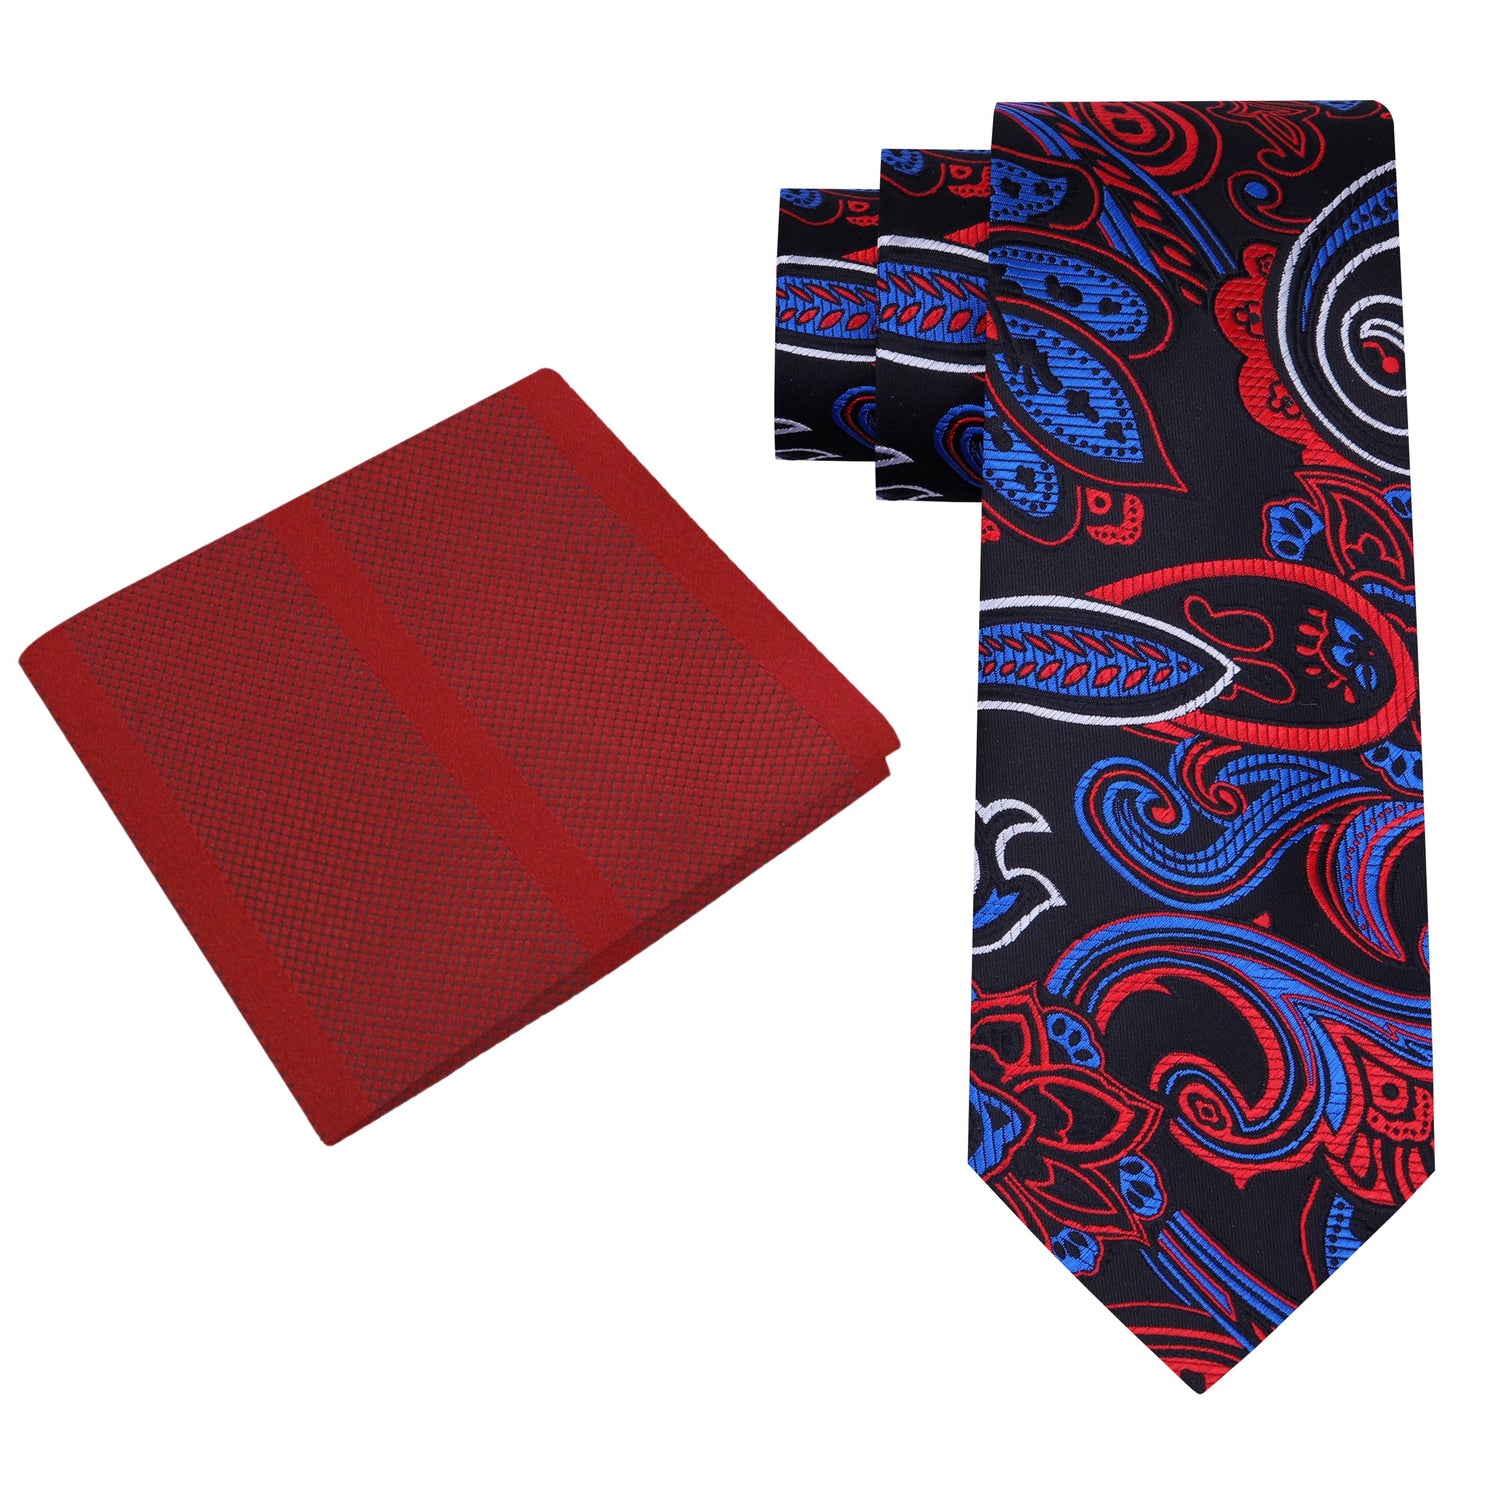 Alt View: Black, Red, White, Blue Paisley With Red Stripe Pocket Square